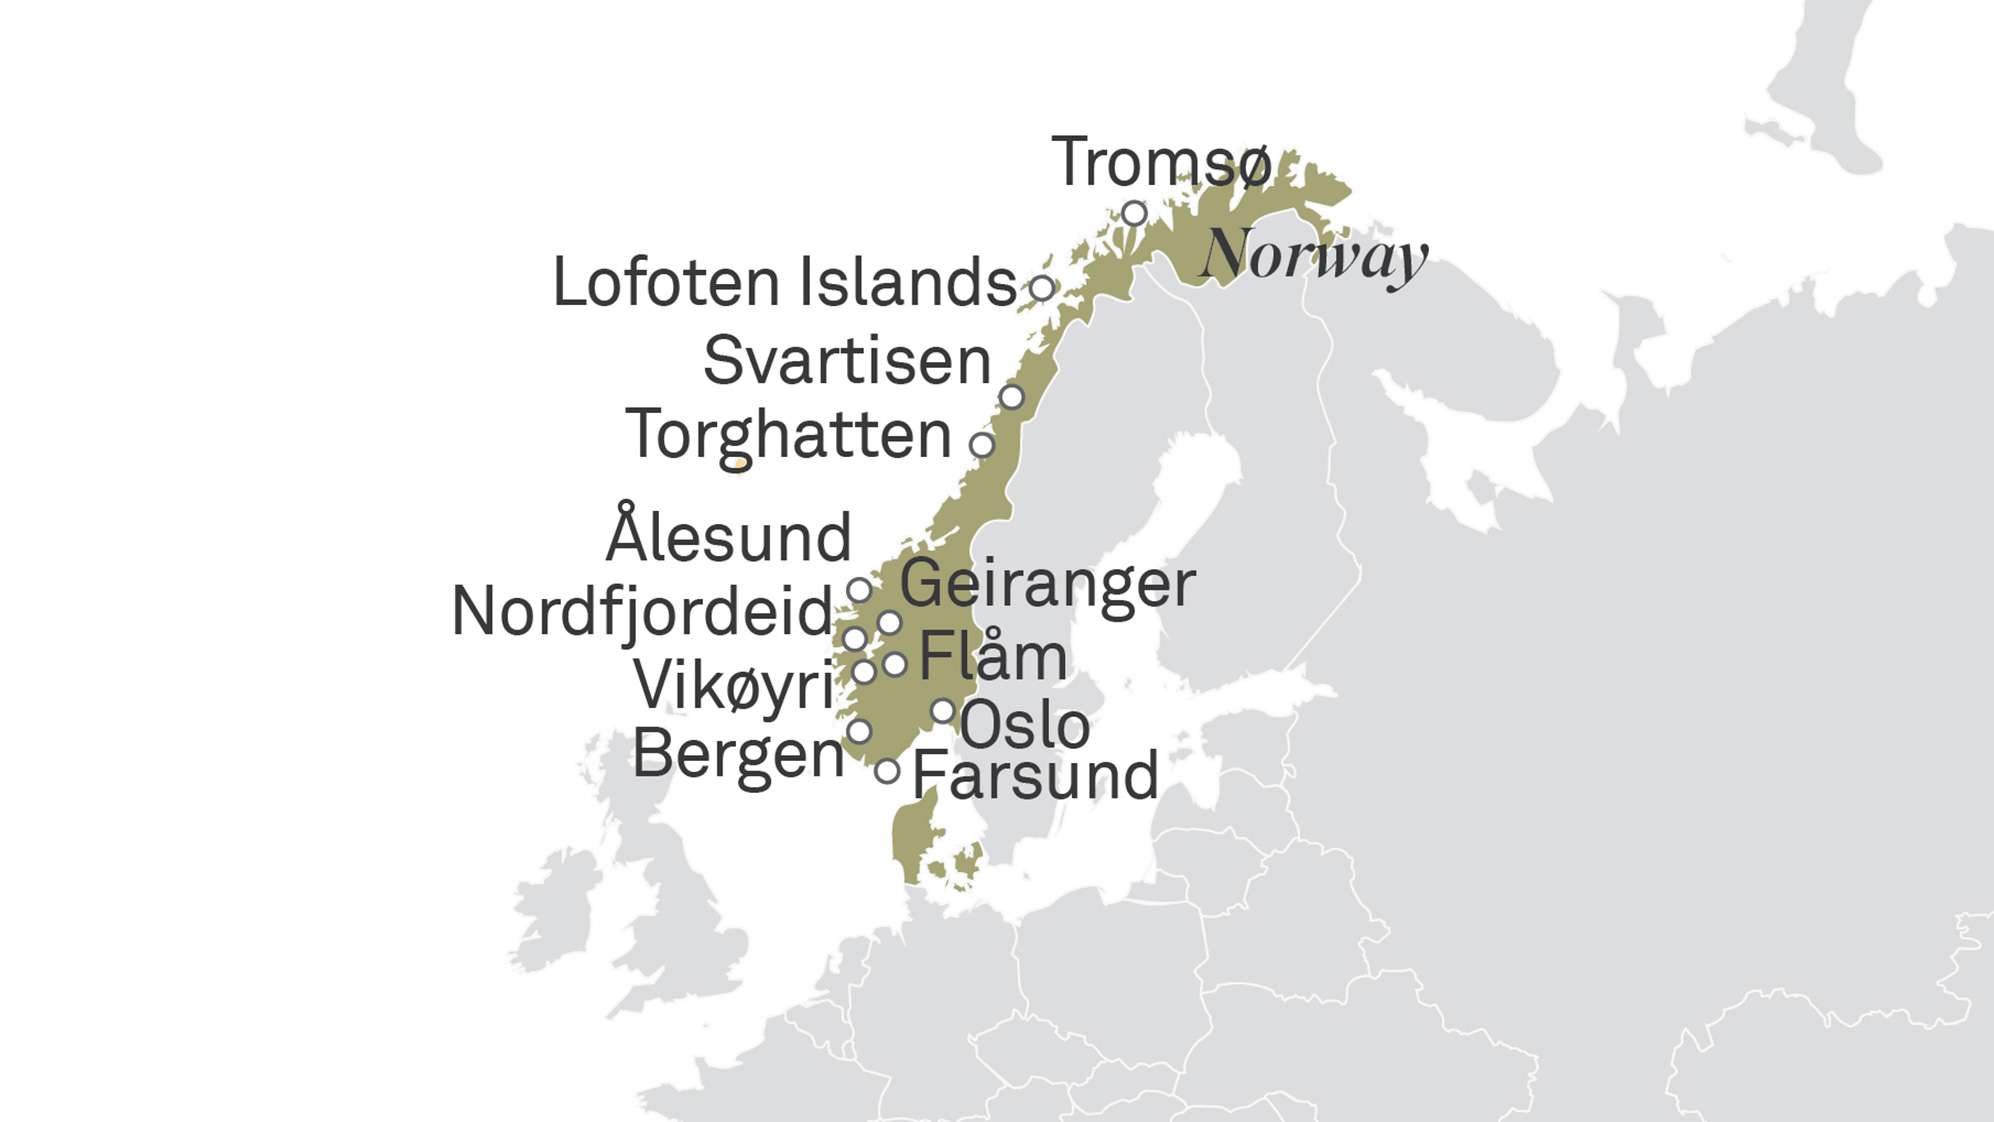 Map of locations in Norway visited by Scenic Eclipse